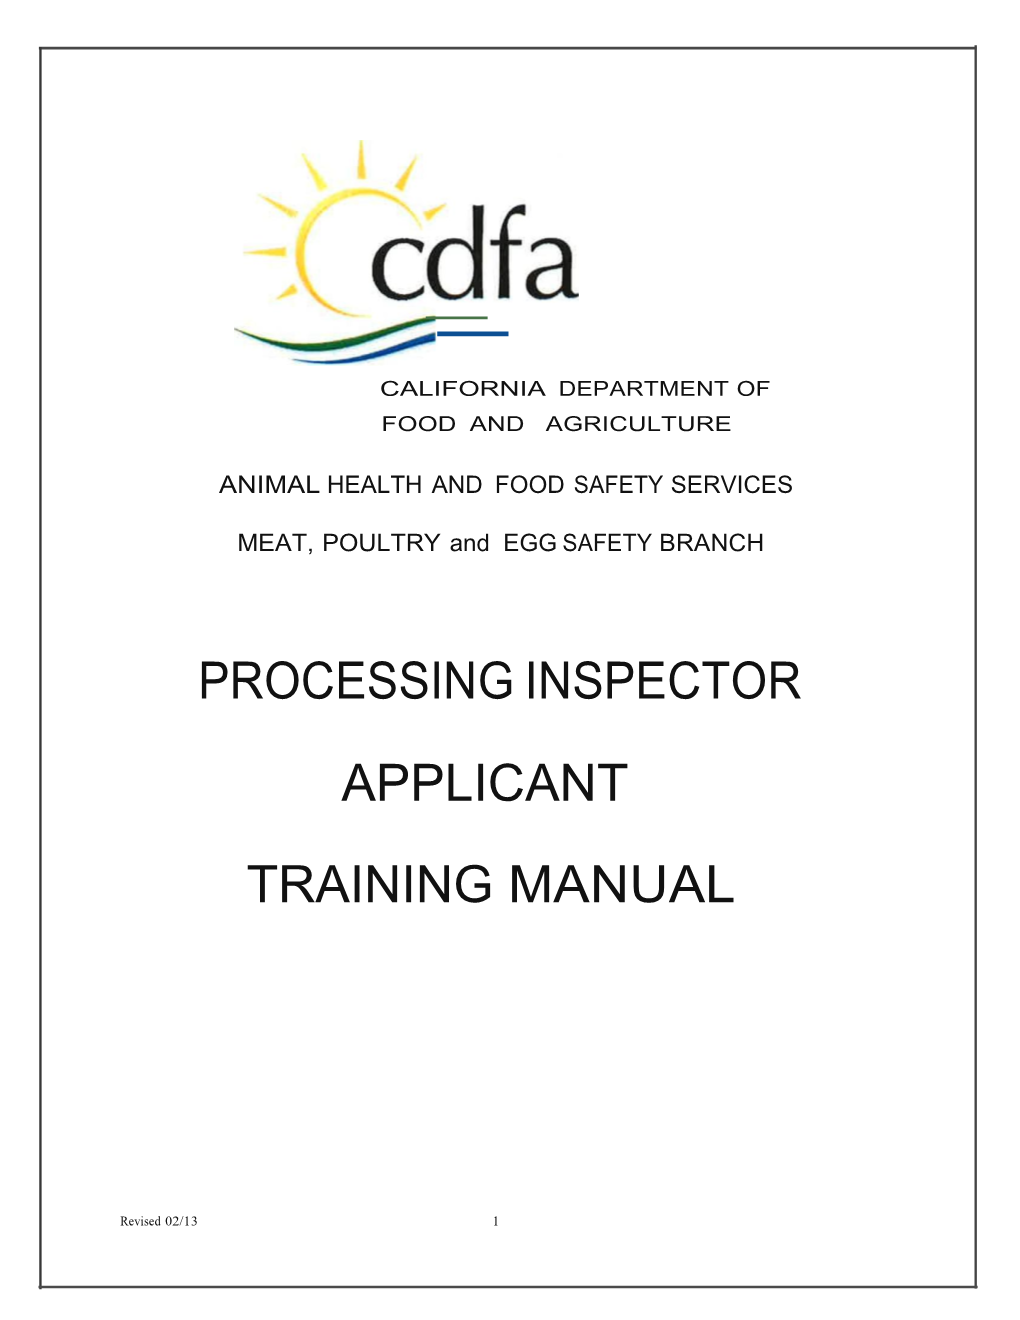 Processing Inspector Applicant Training Manual